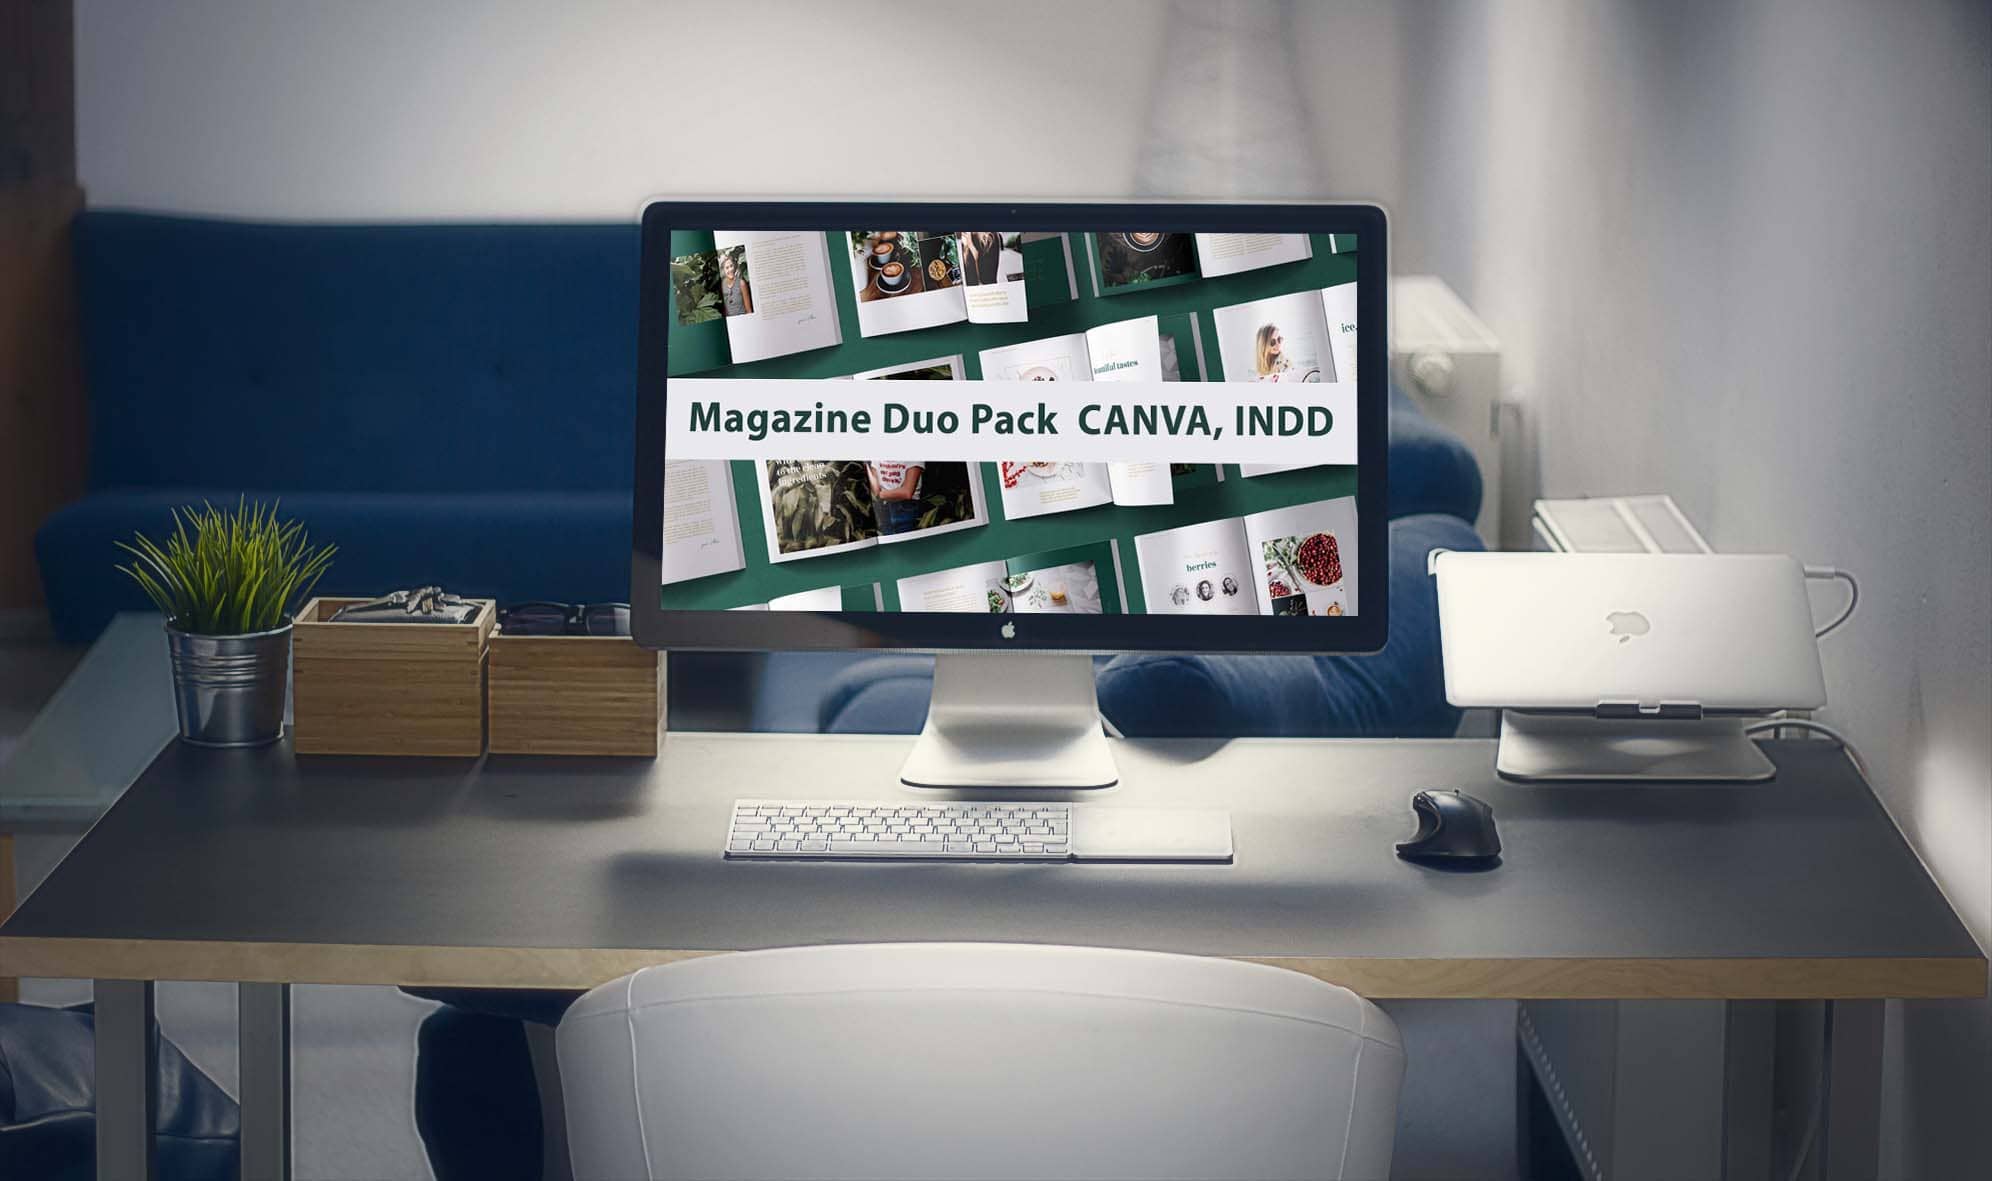 magazine duo pack canva indd computer mockup.